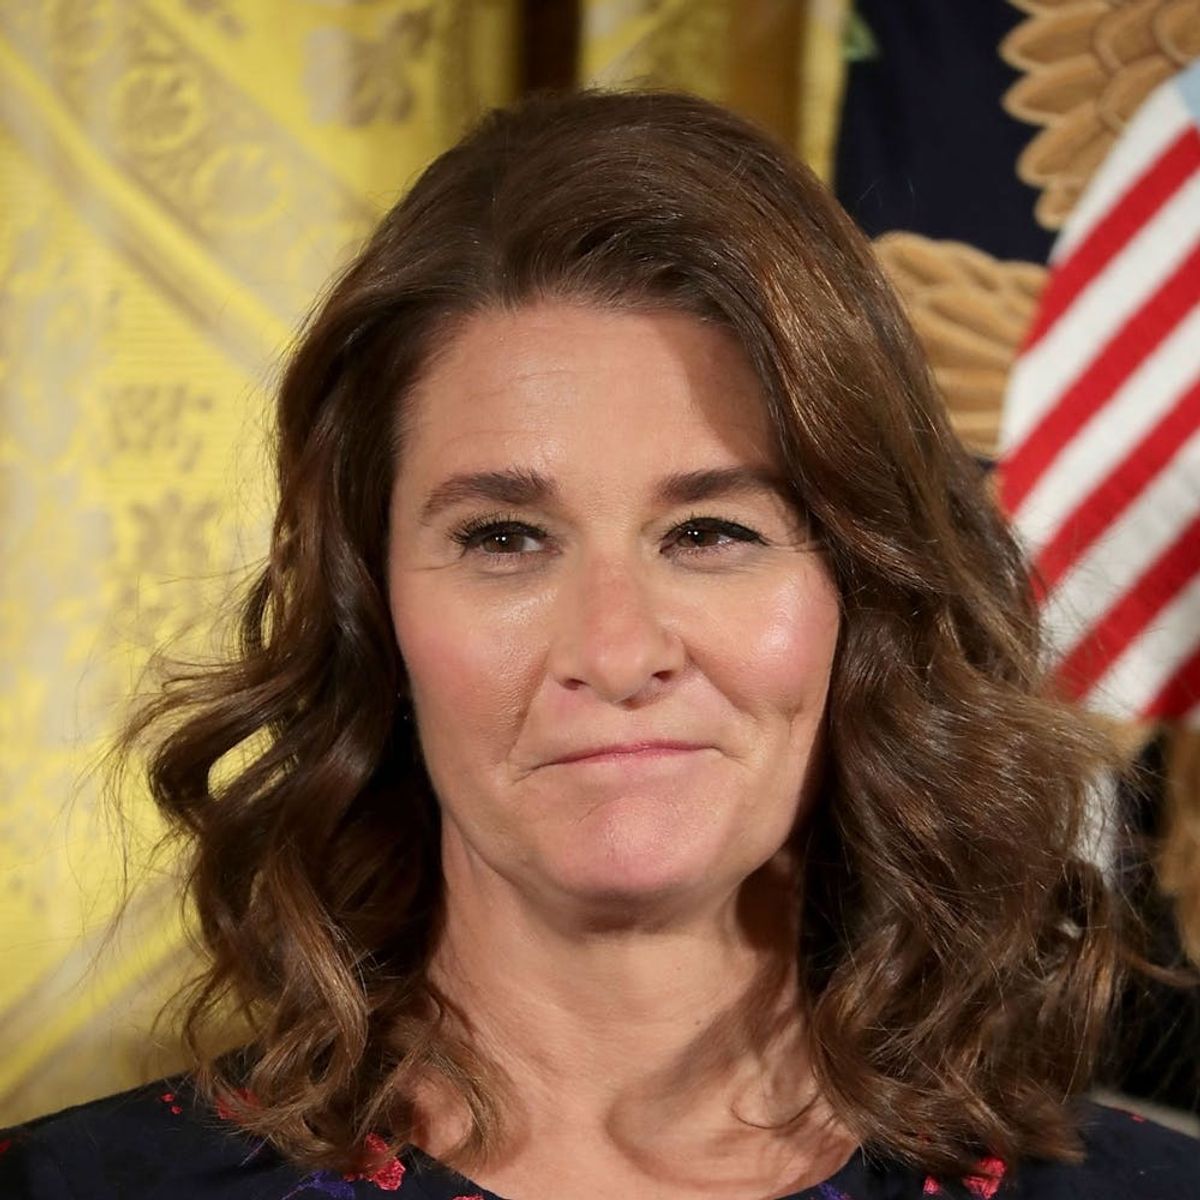 Melinda Gates Hopes to Help 96 Million Women Gain Access to Birth Control Over the Next 3 Years